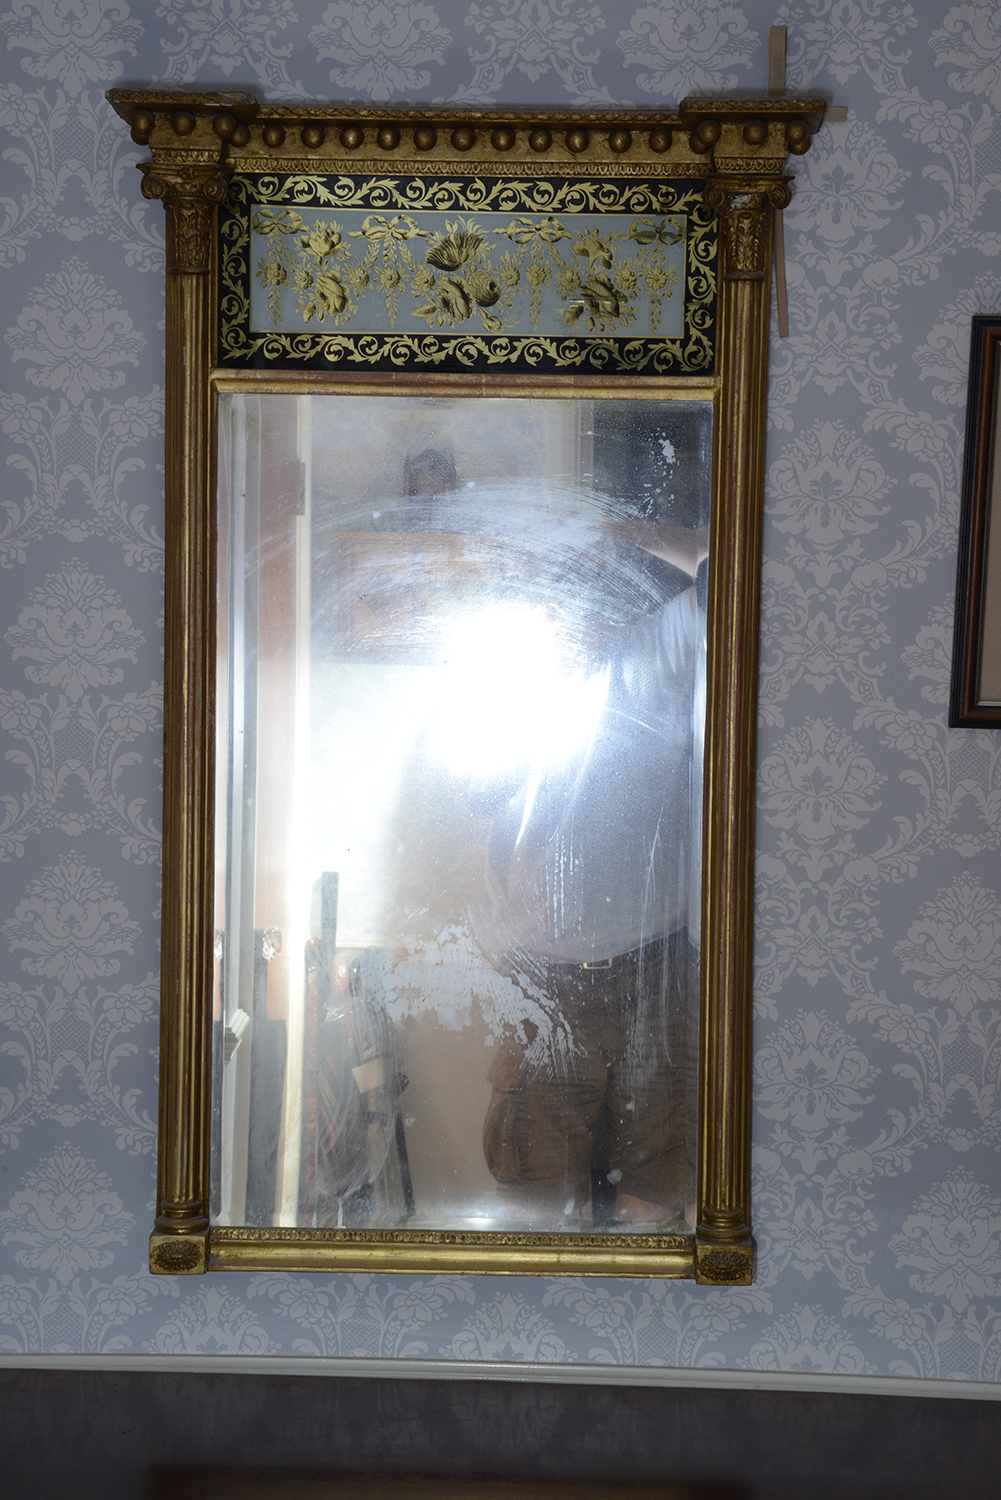 A Regency giltwood and verre elglomise pier glass - Image 2 of 3